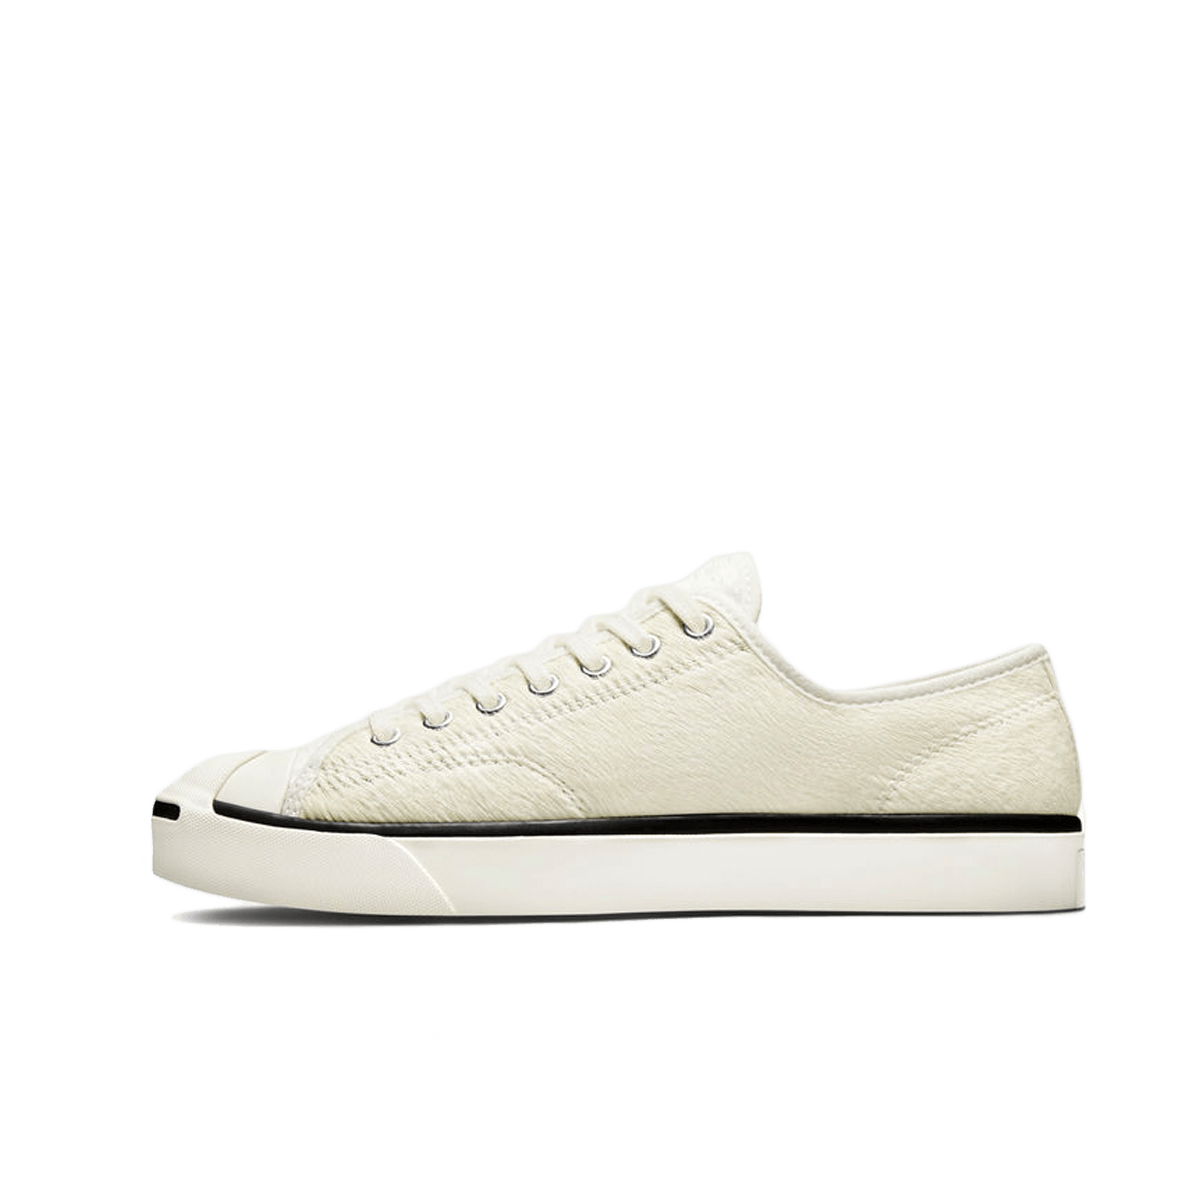 CLOT x Converse Jack Purcell 'White'